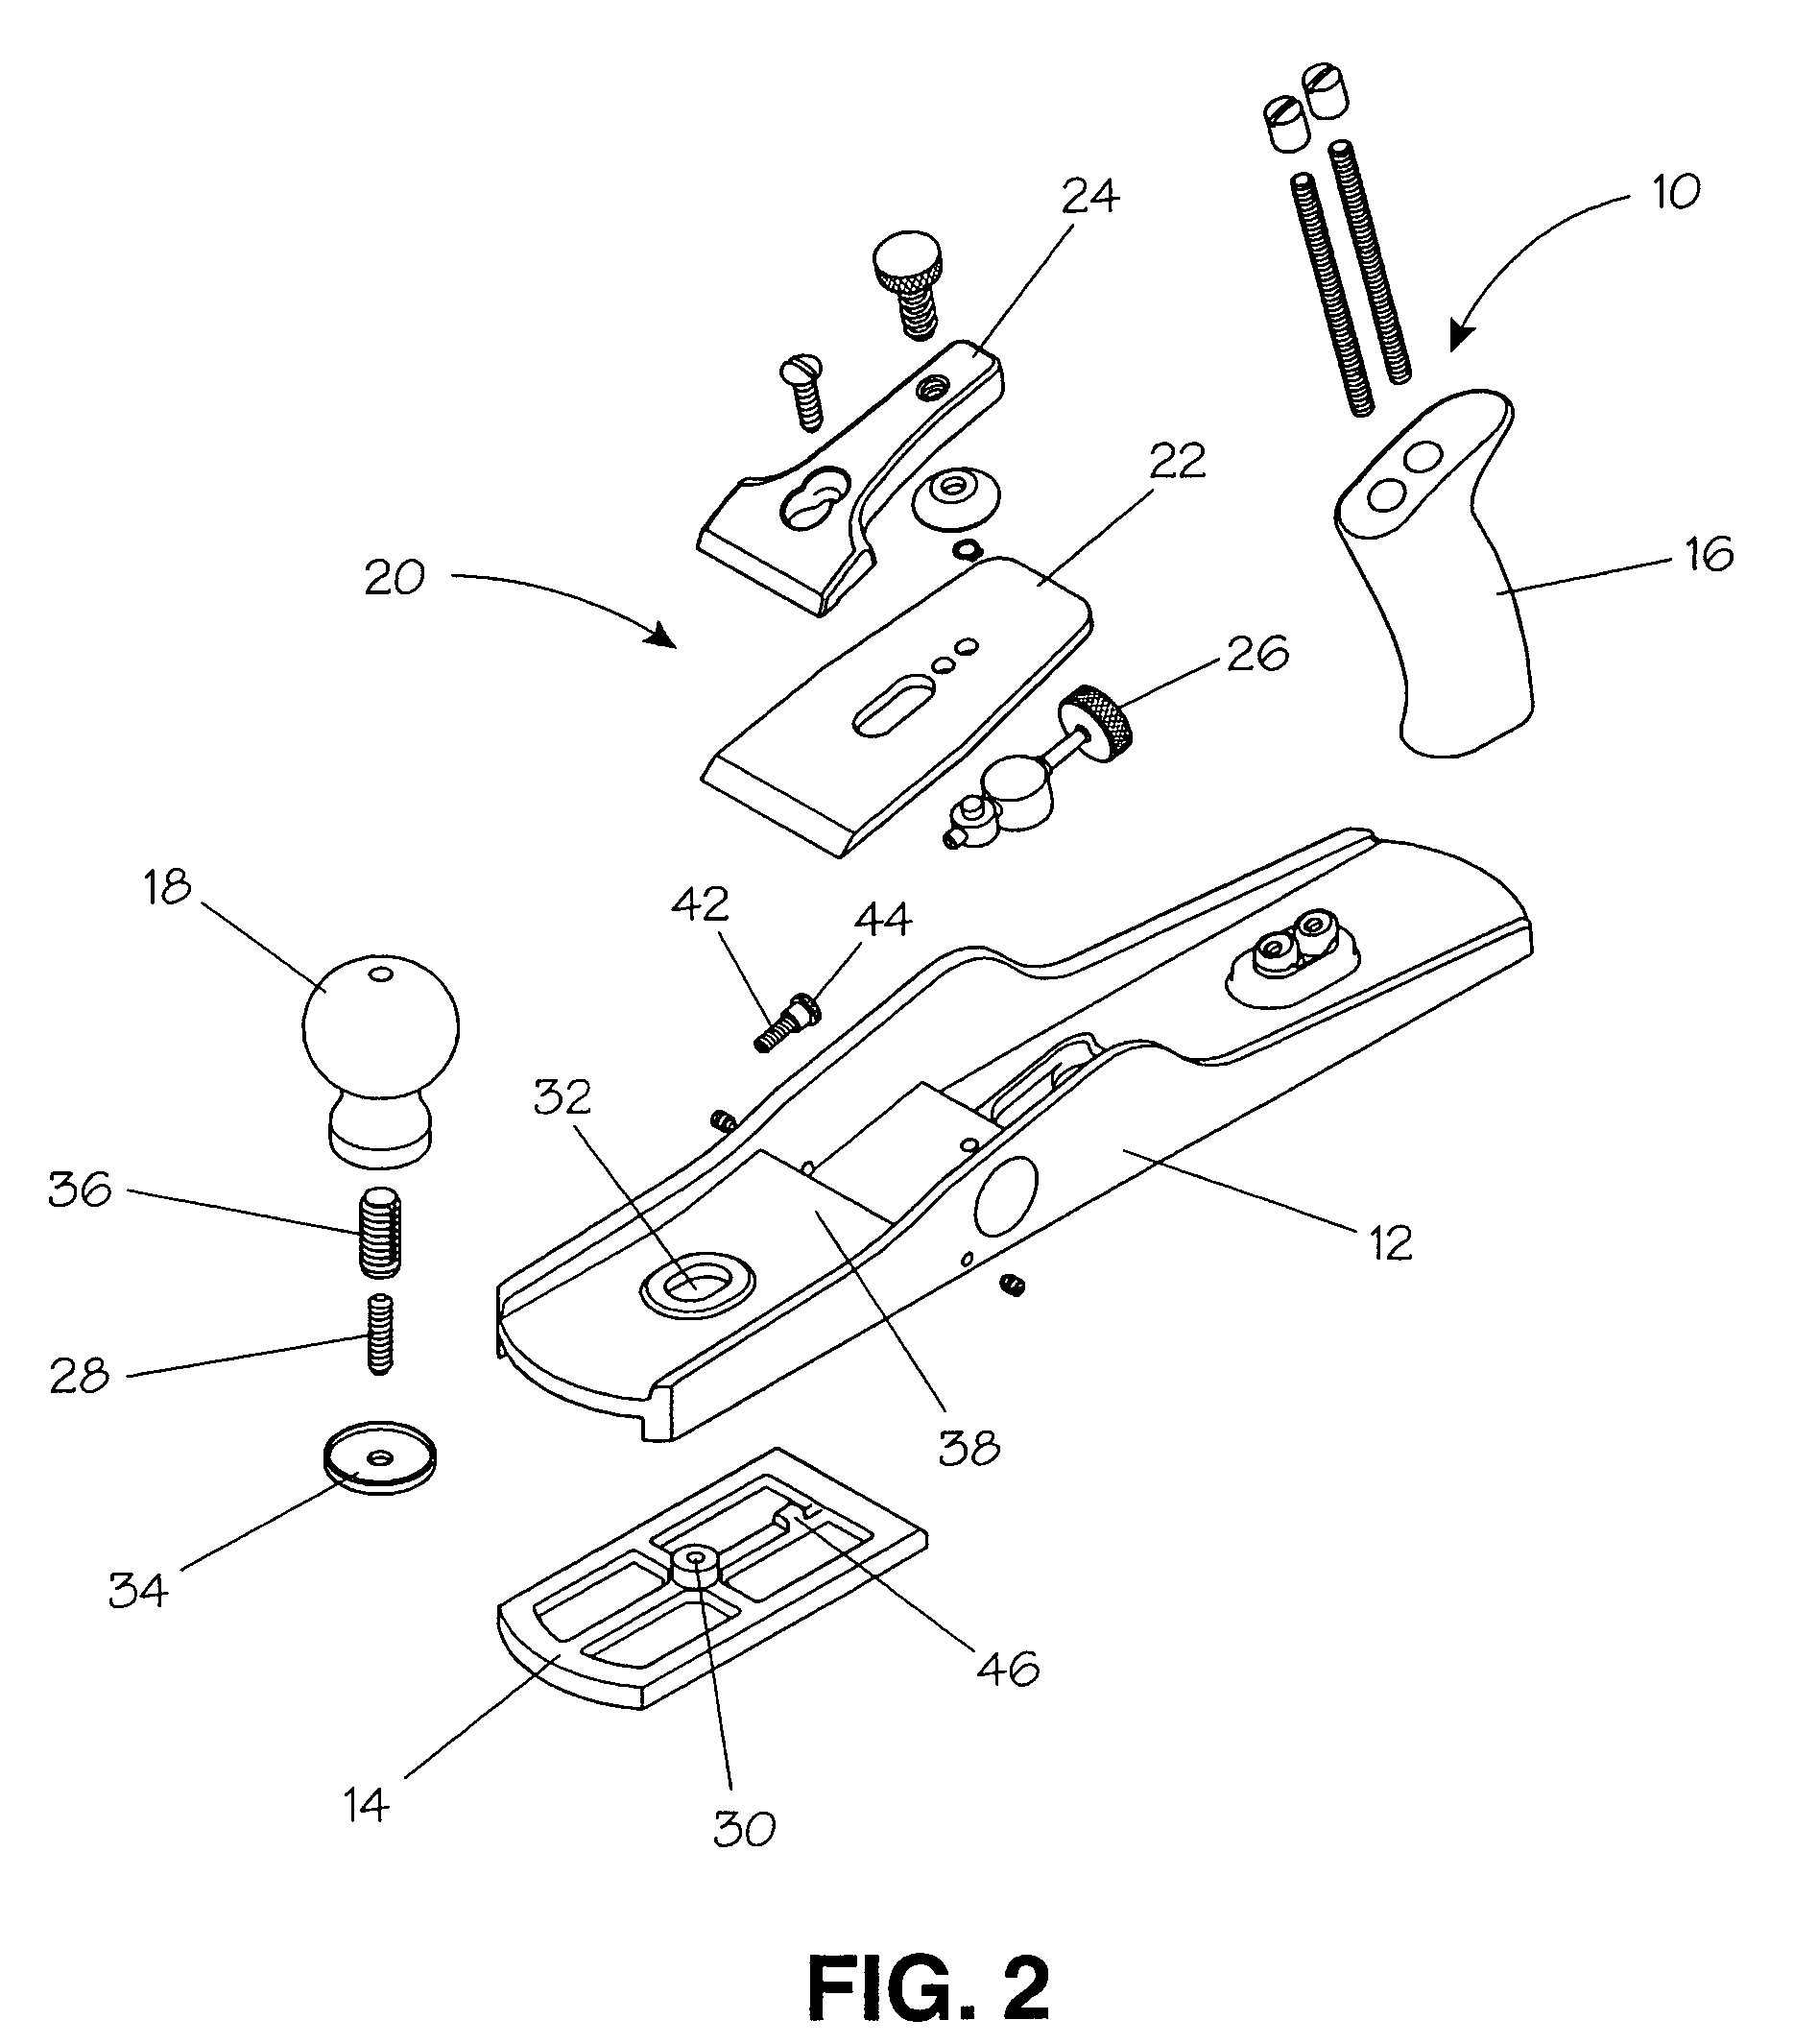 Woodworking plane with adjustable mouth